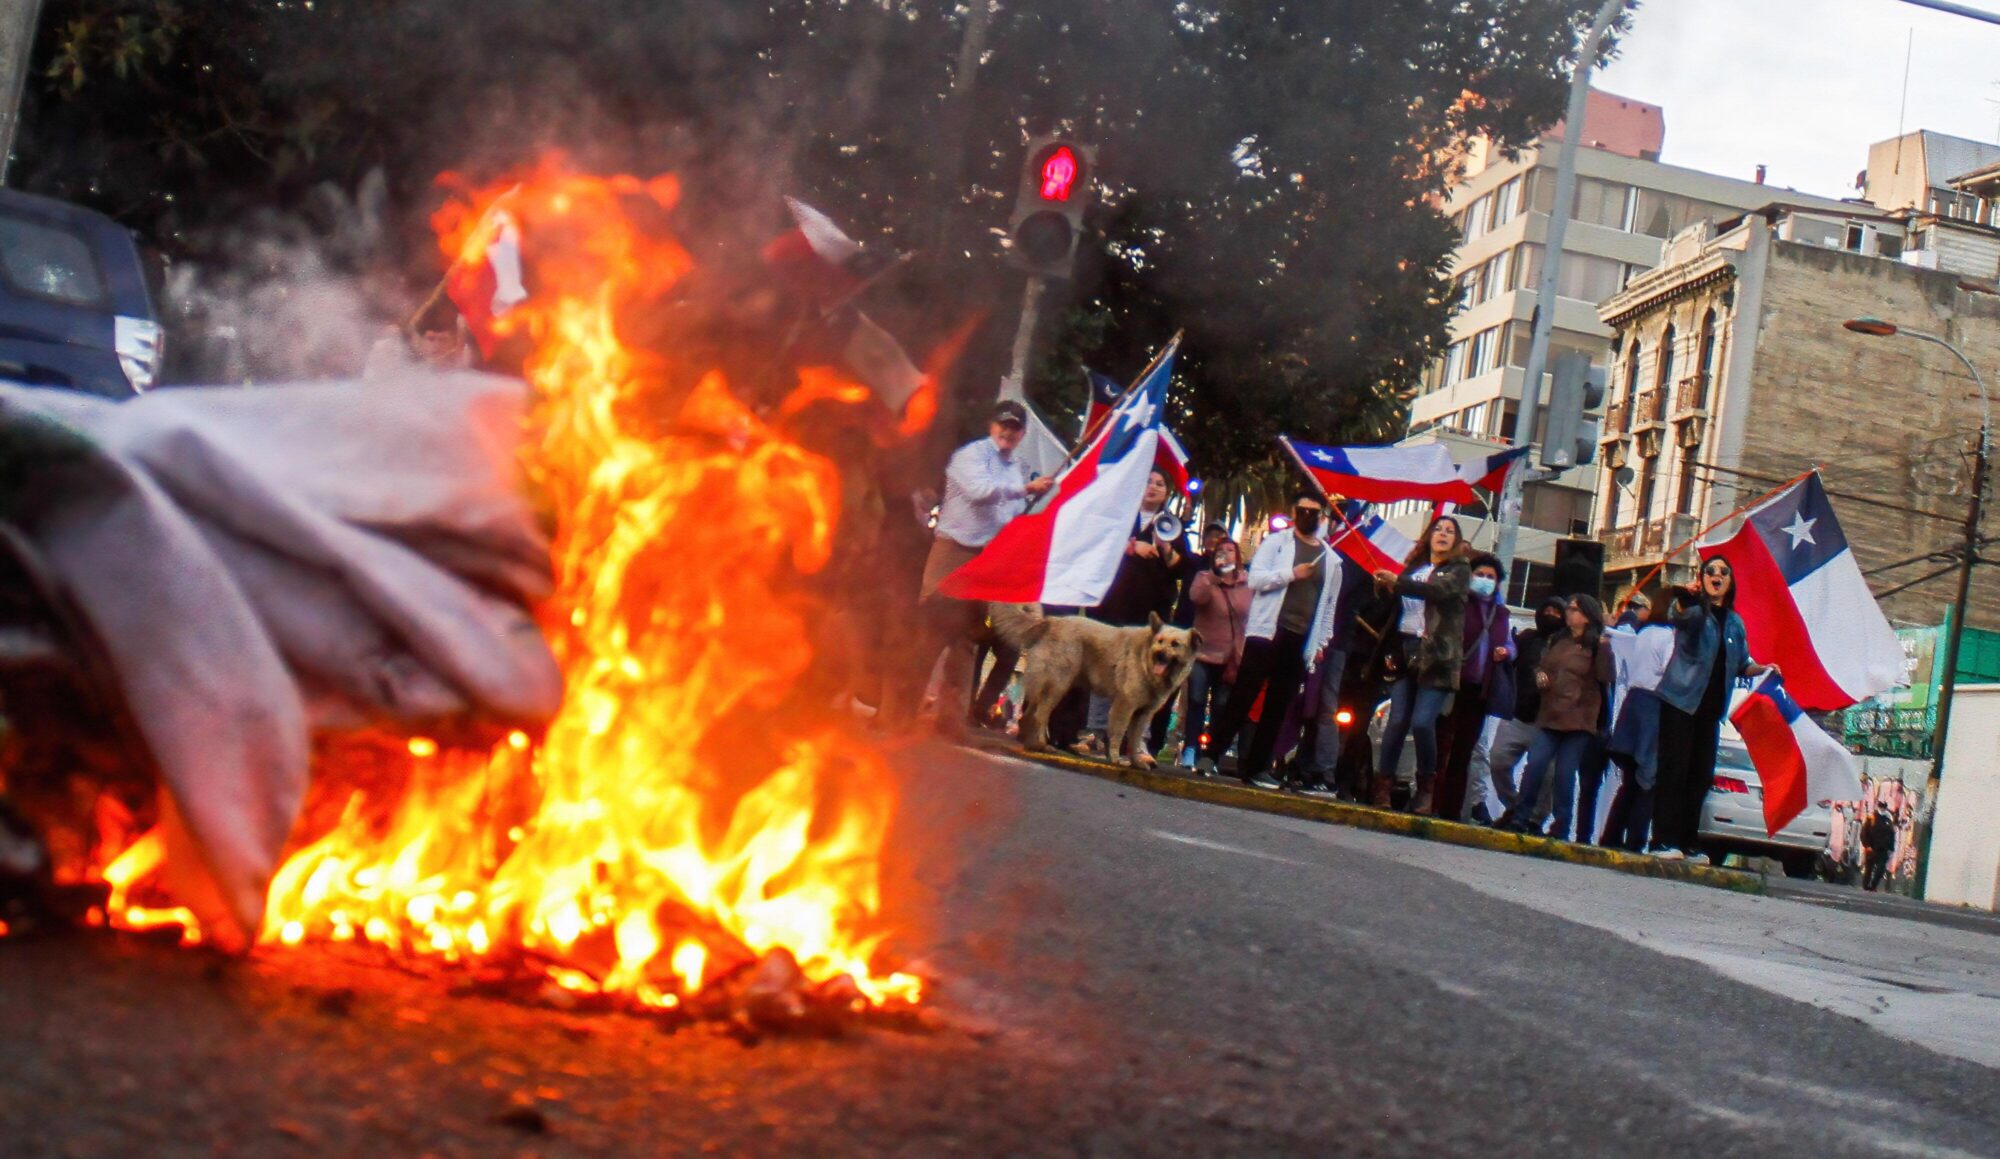 <p>A banner expressing support for Chile’s proposed new constitution is set on fire during a protest by supporters of the ‘reject’ campaign, in Valparaiso, August 2022. Chileans voted to reject the reform in a September referendum (Image: Cristobal Basaure Araya / SIPA / Alamy)</p>